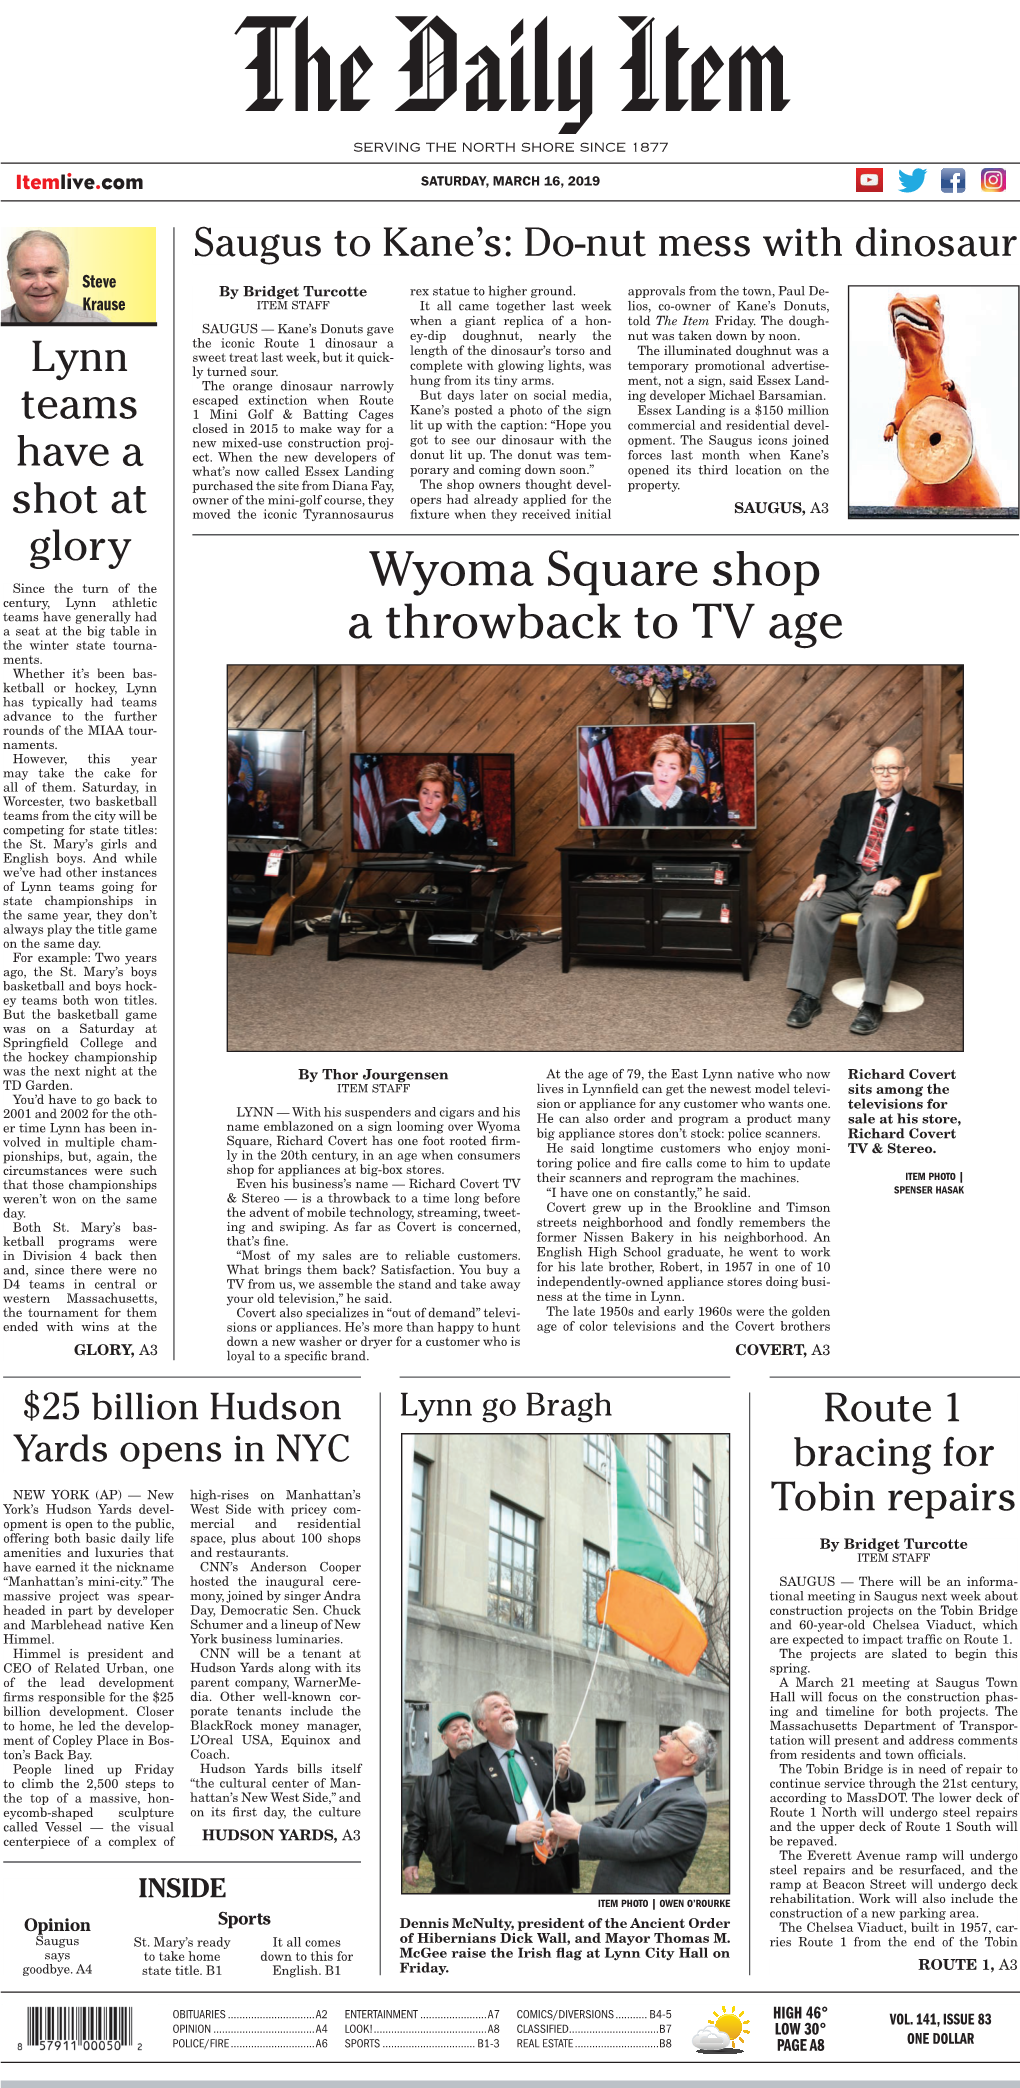 Wyoma Square Shop a Throwback to TV Age Short